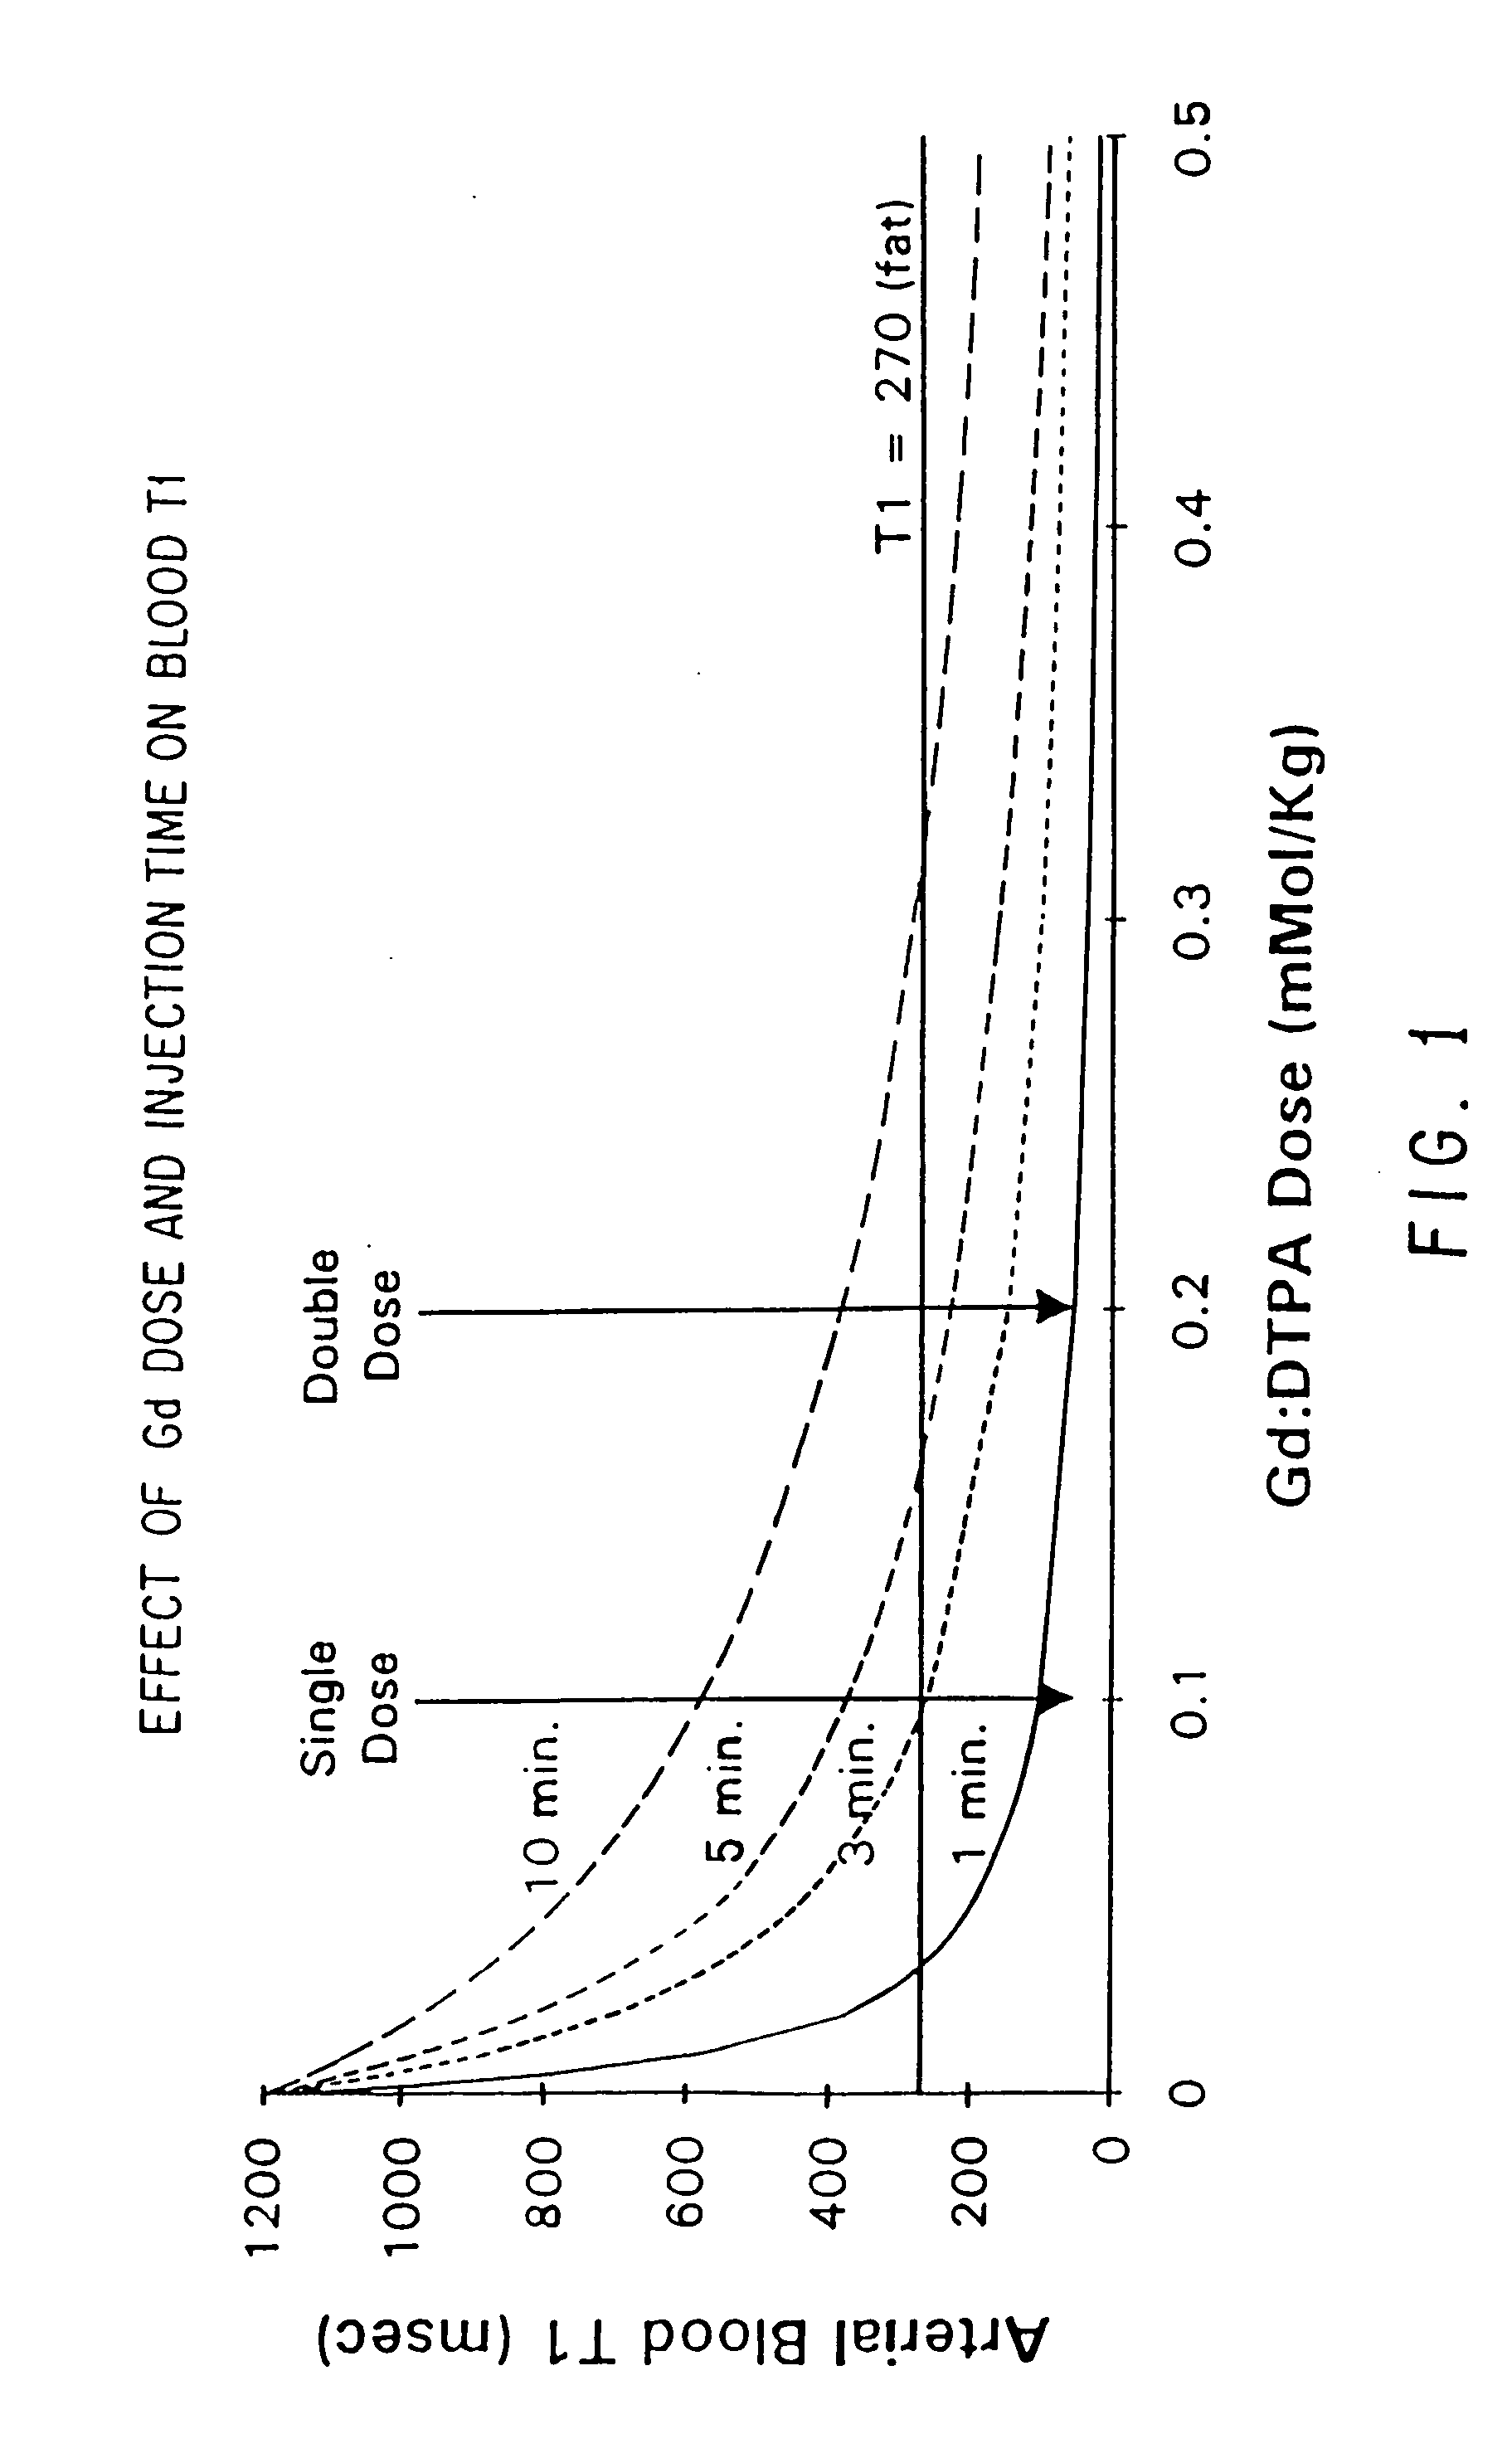 Method and apparatus for imaging abdominal aorta and aortic aneurysms